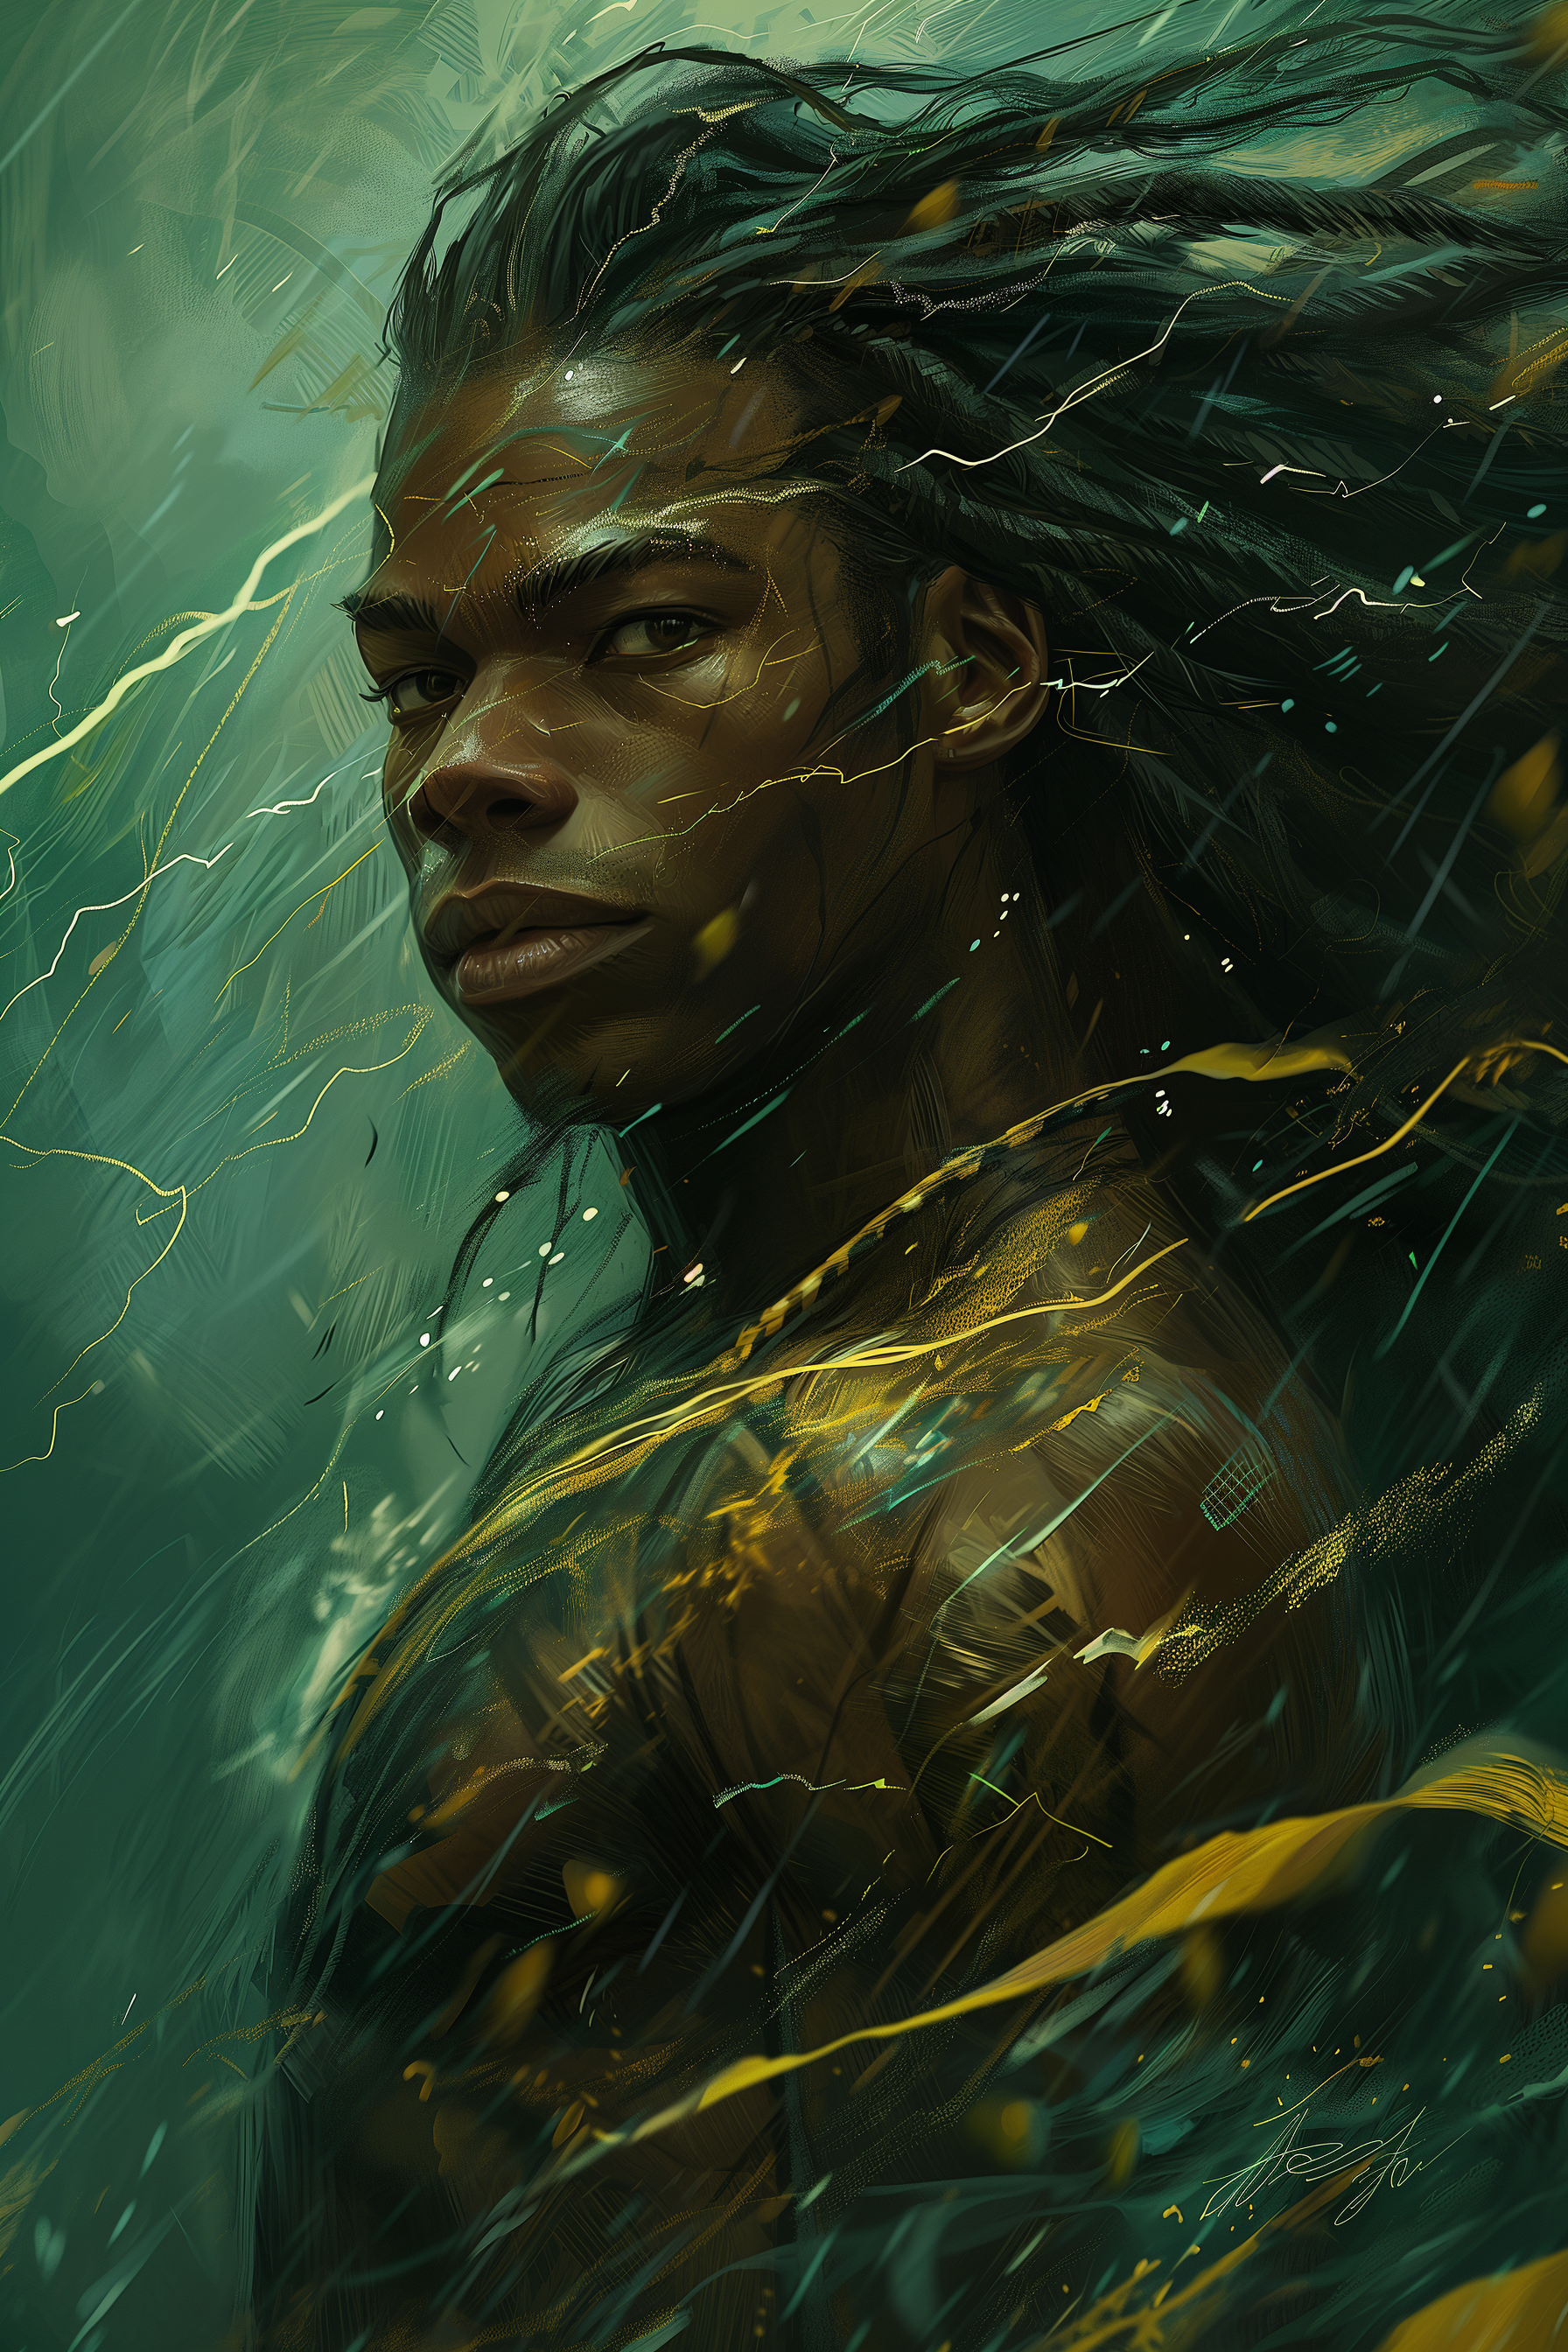 A triton with dark brown skin, long black hair, surrounded by sparks of lightning magic.